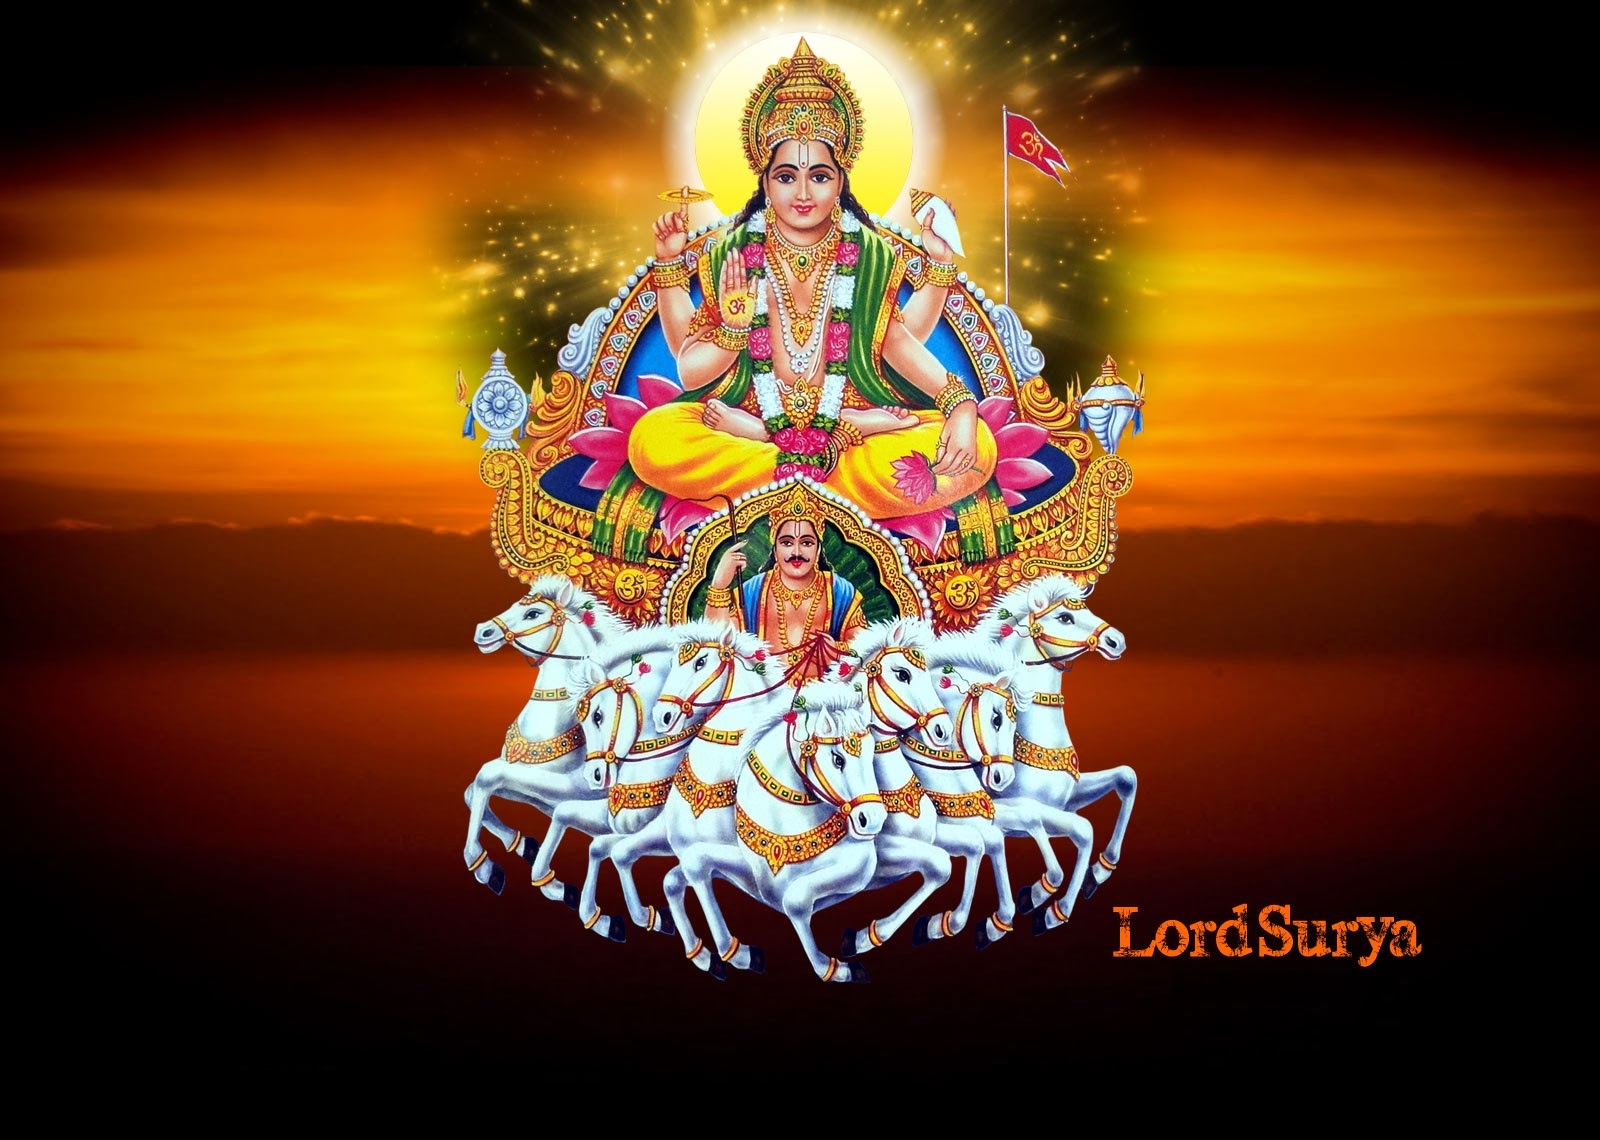 surya dev hd wallpaper surya dev wallpaper surya dev hd pictures surya 1600x1140